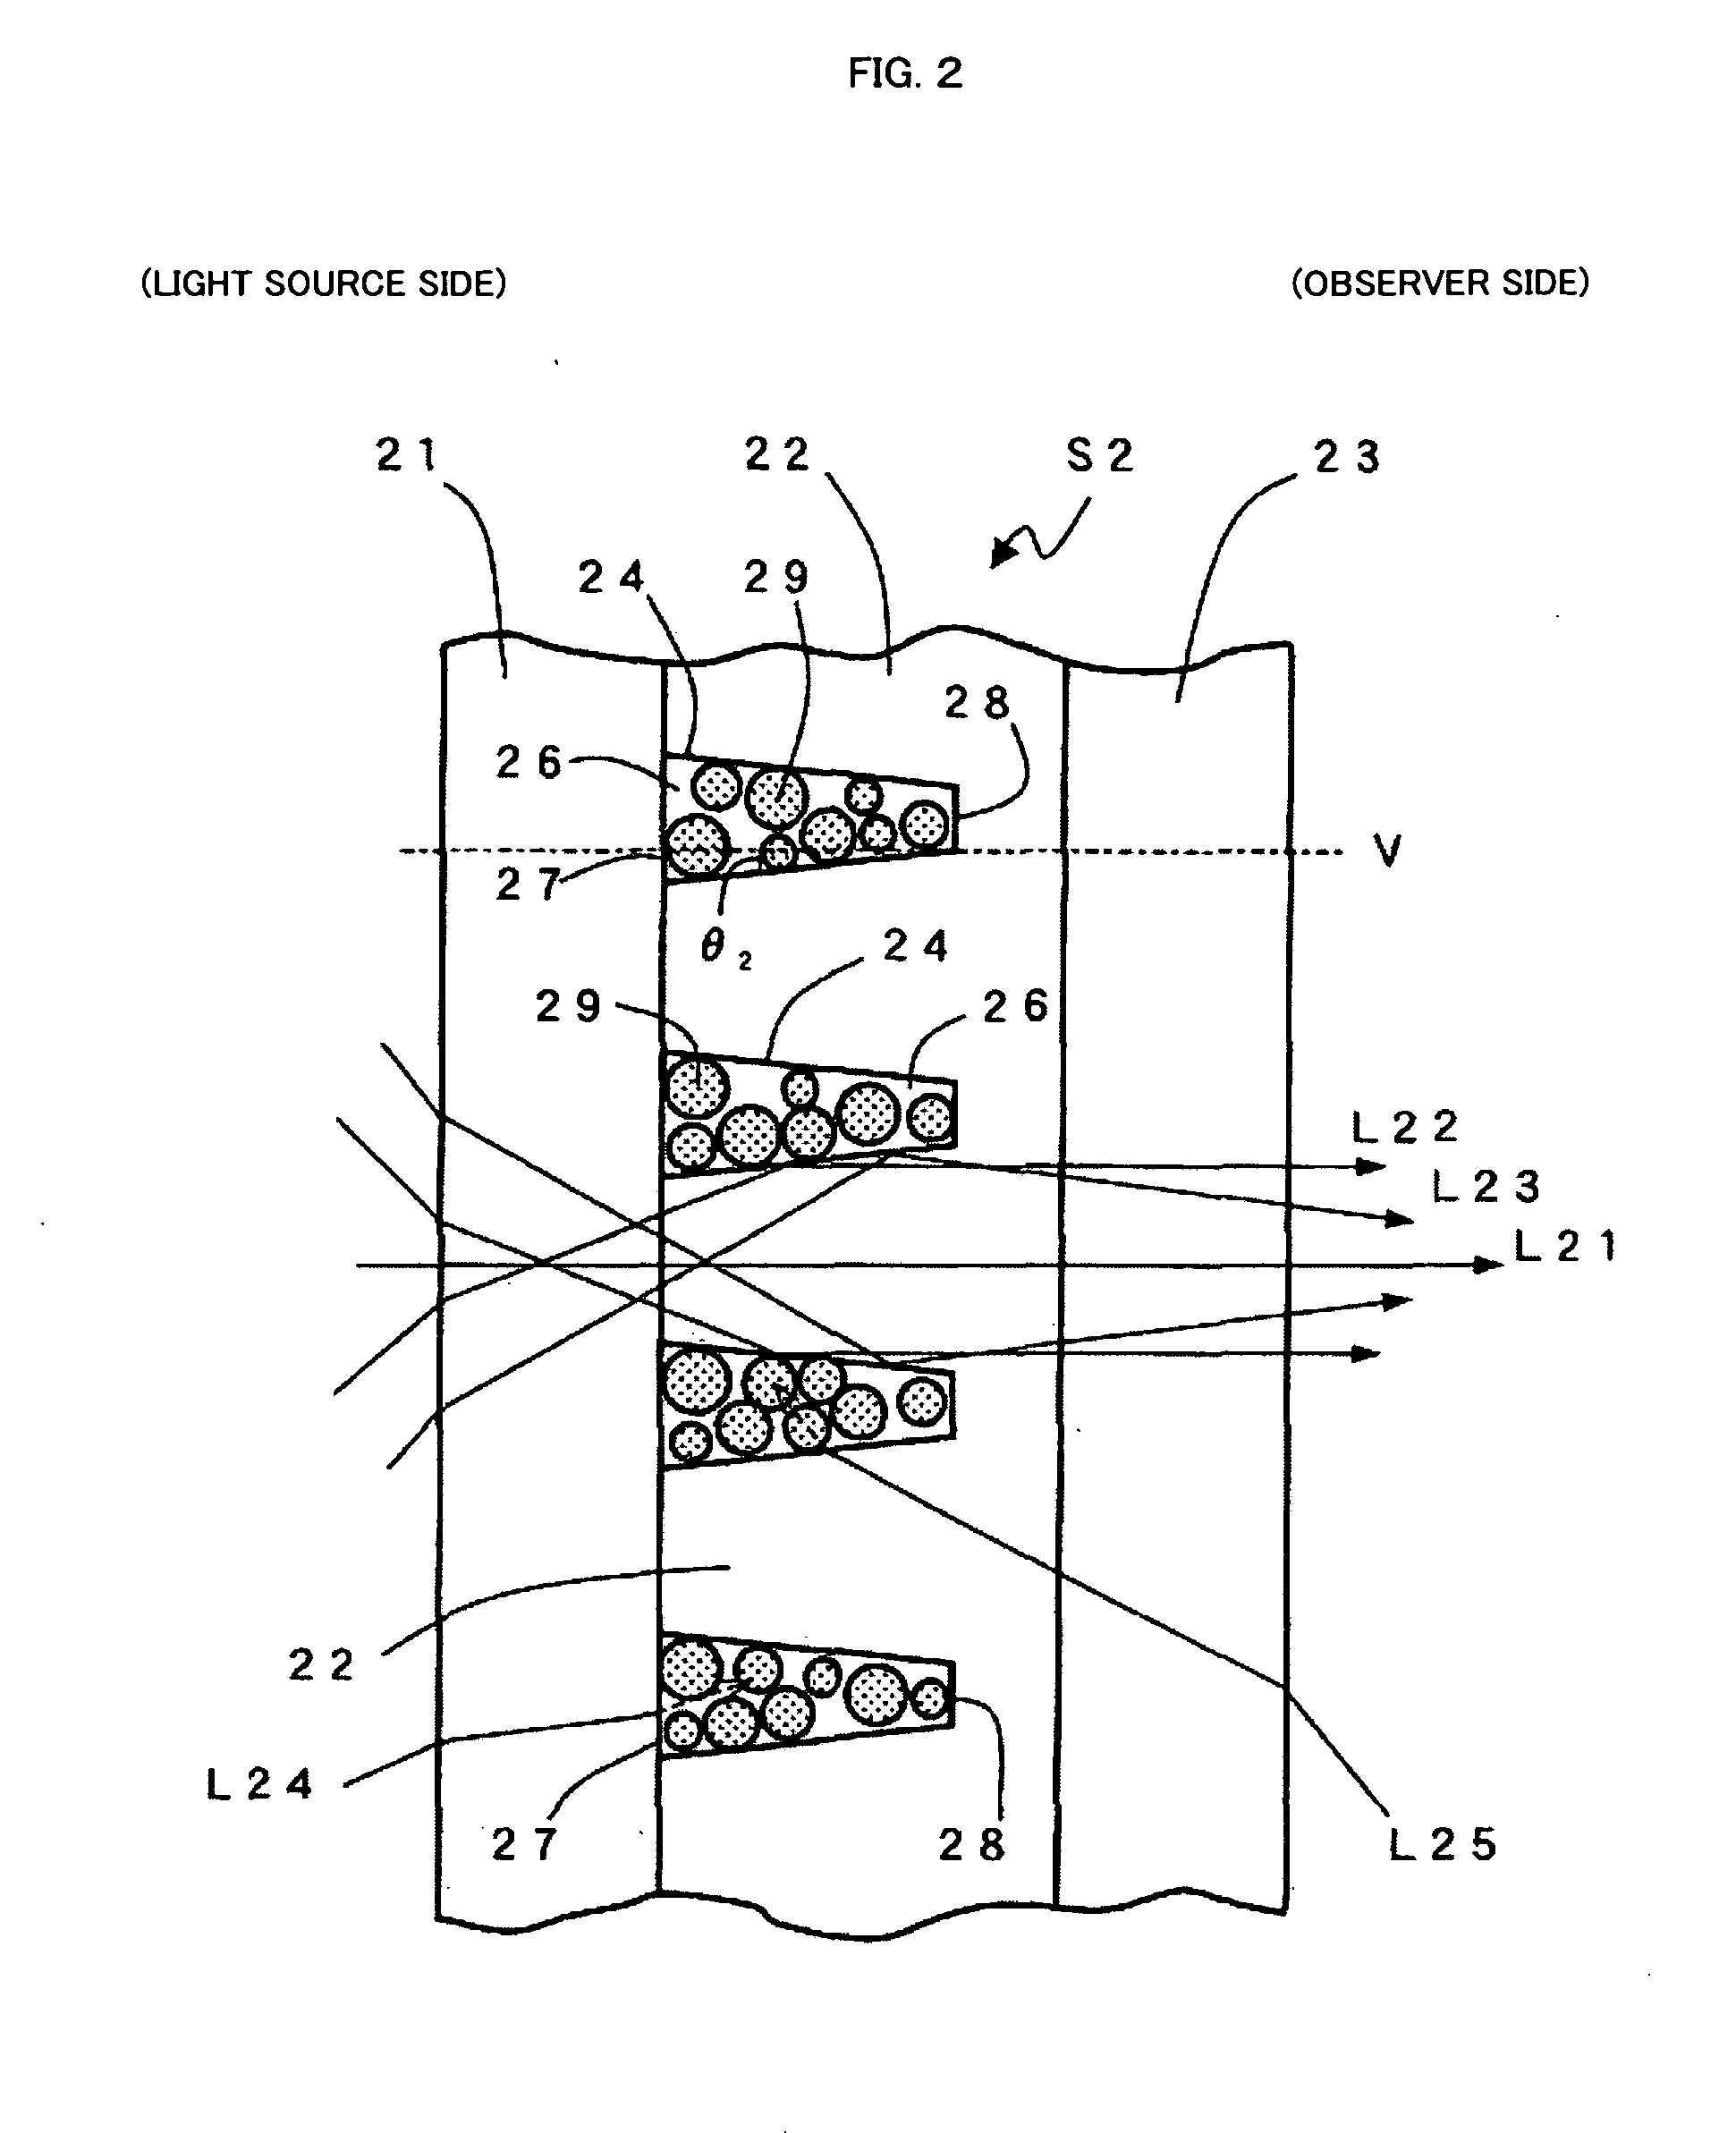 View angle controlling sheet and liquid crystal display apparatus using the same